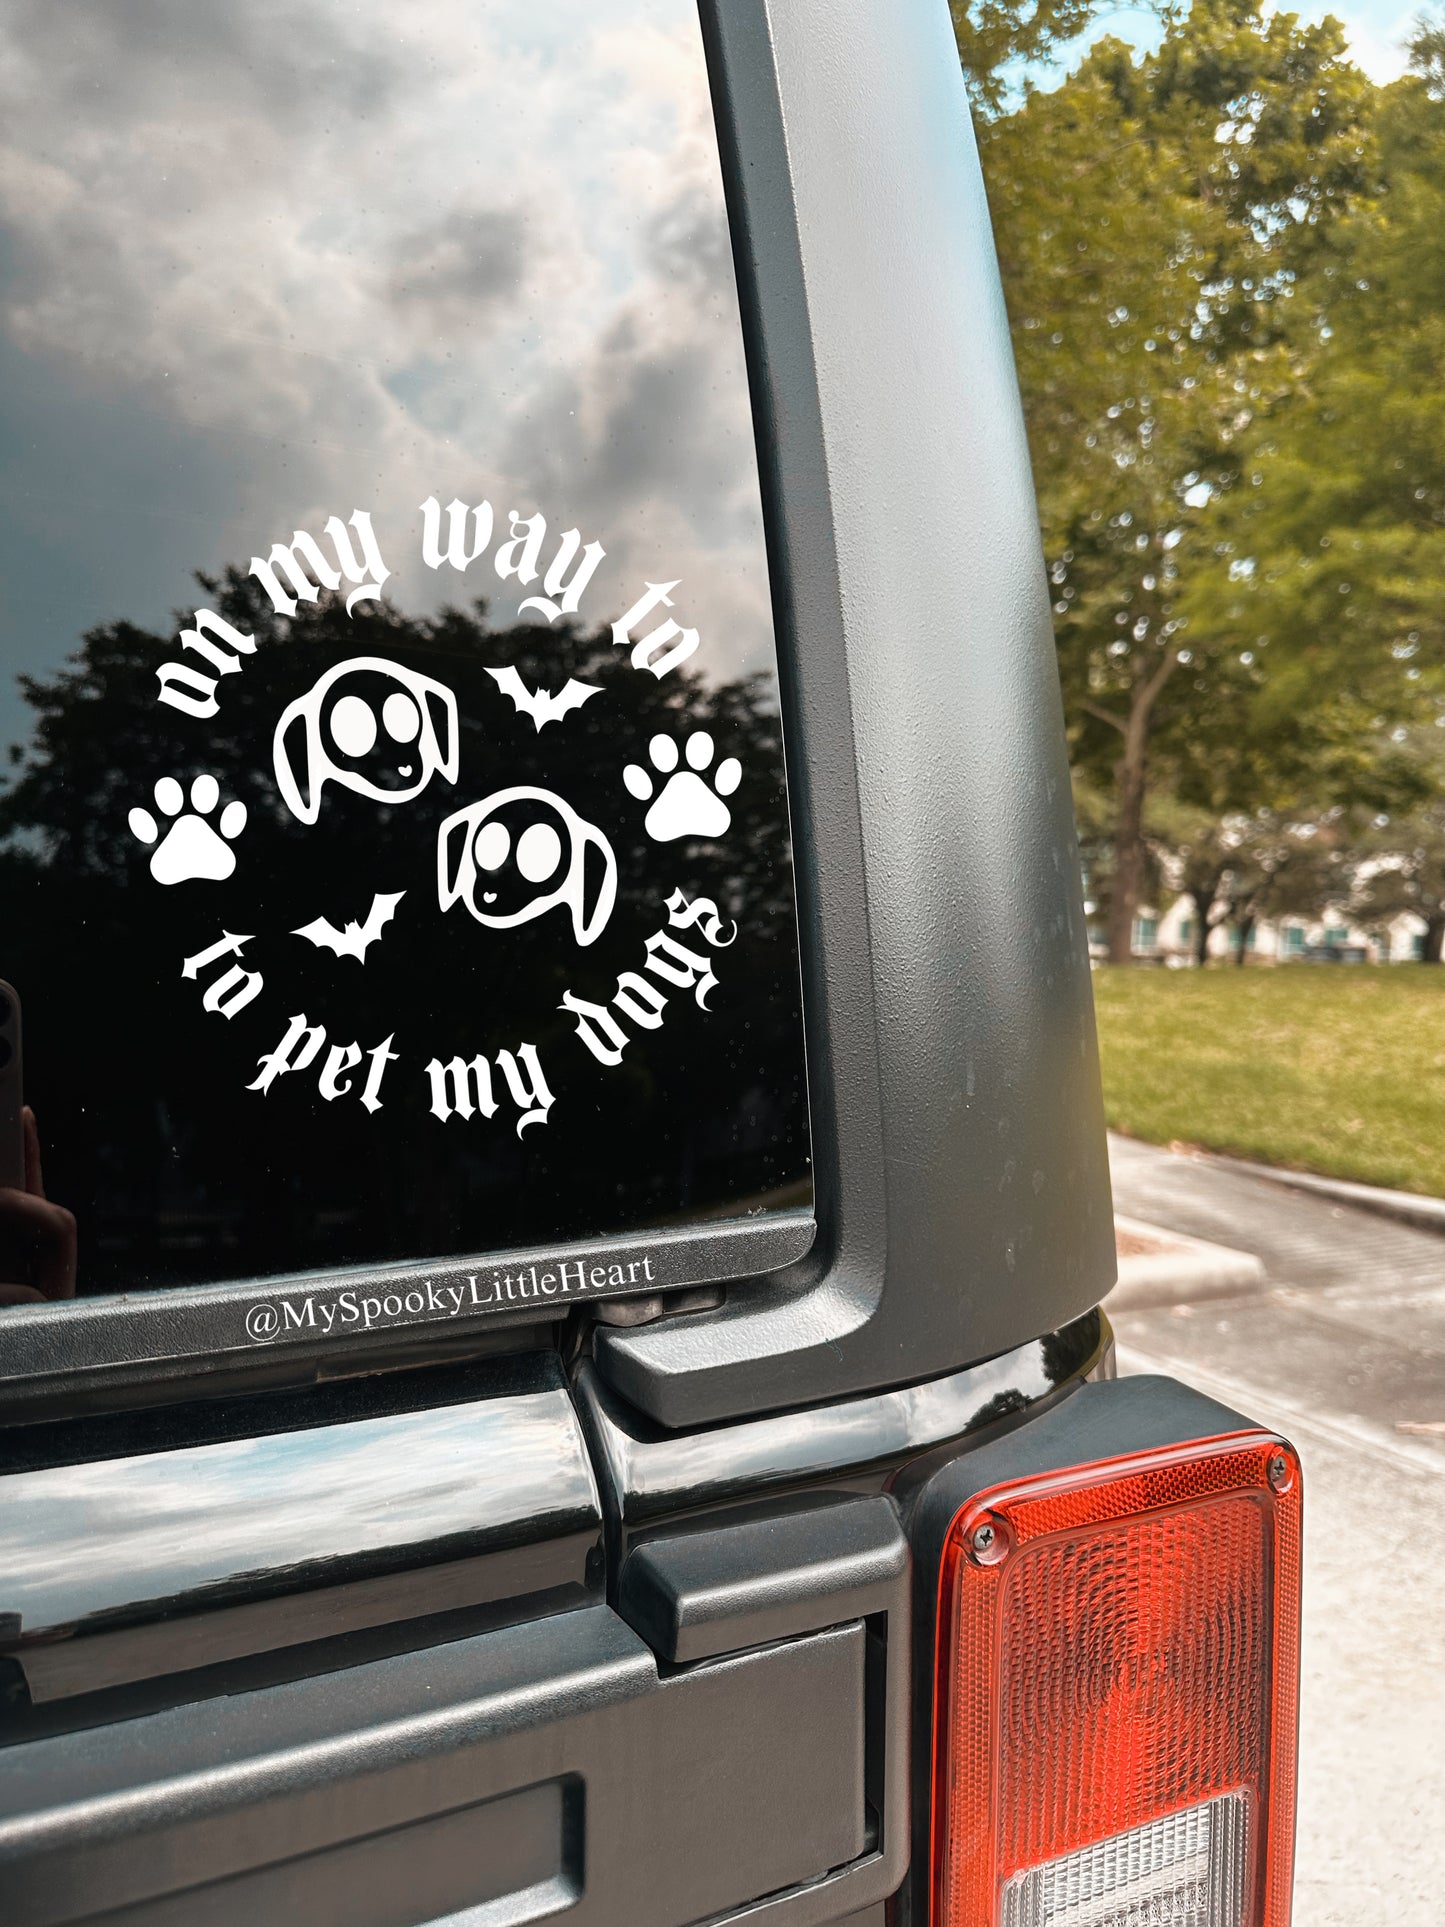 On my way to pet my Dogs skeleton dogs with bats and paw prints Vinyl Decal